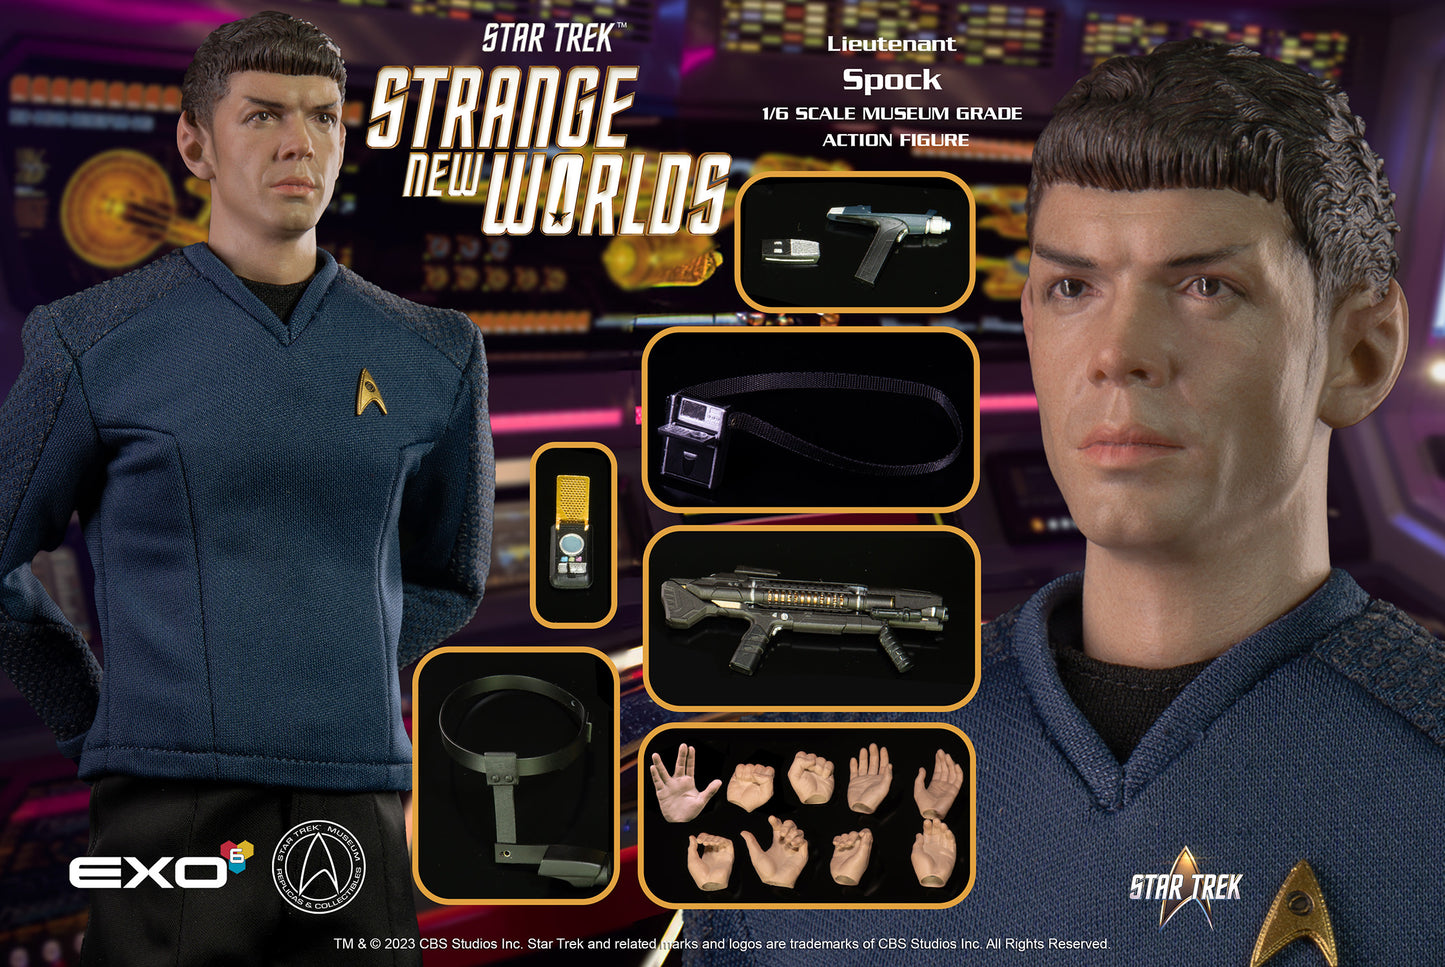 Strange New Worlds Spock 1/6 Scale Figure by EXO-6